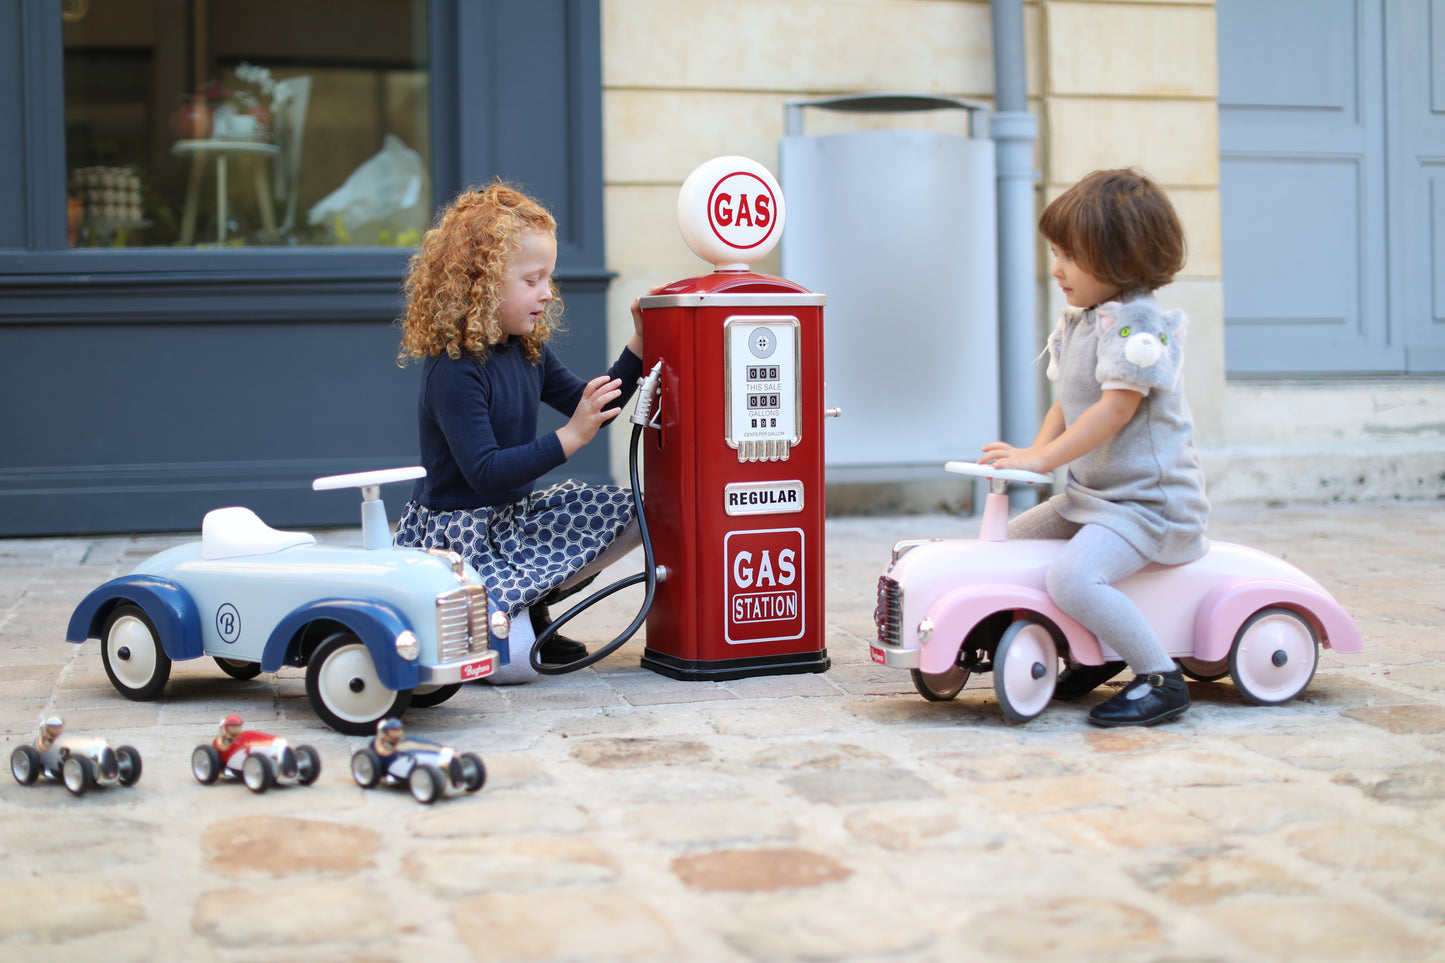 Kids petrol station for toy cars